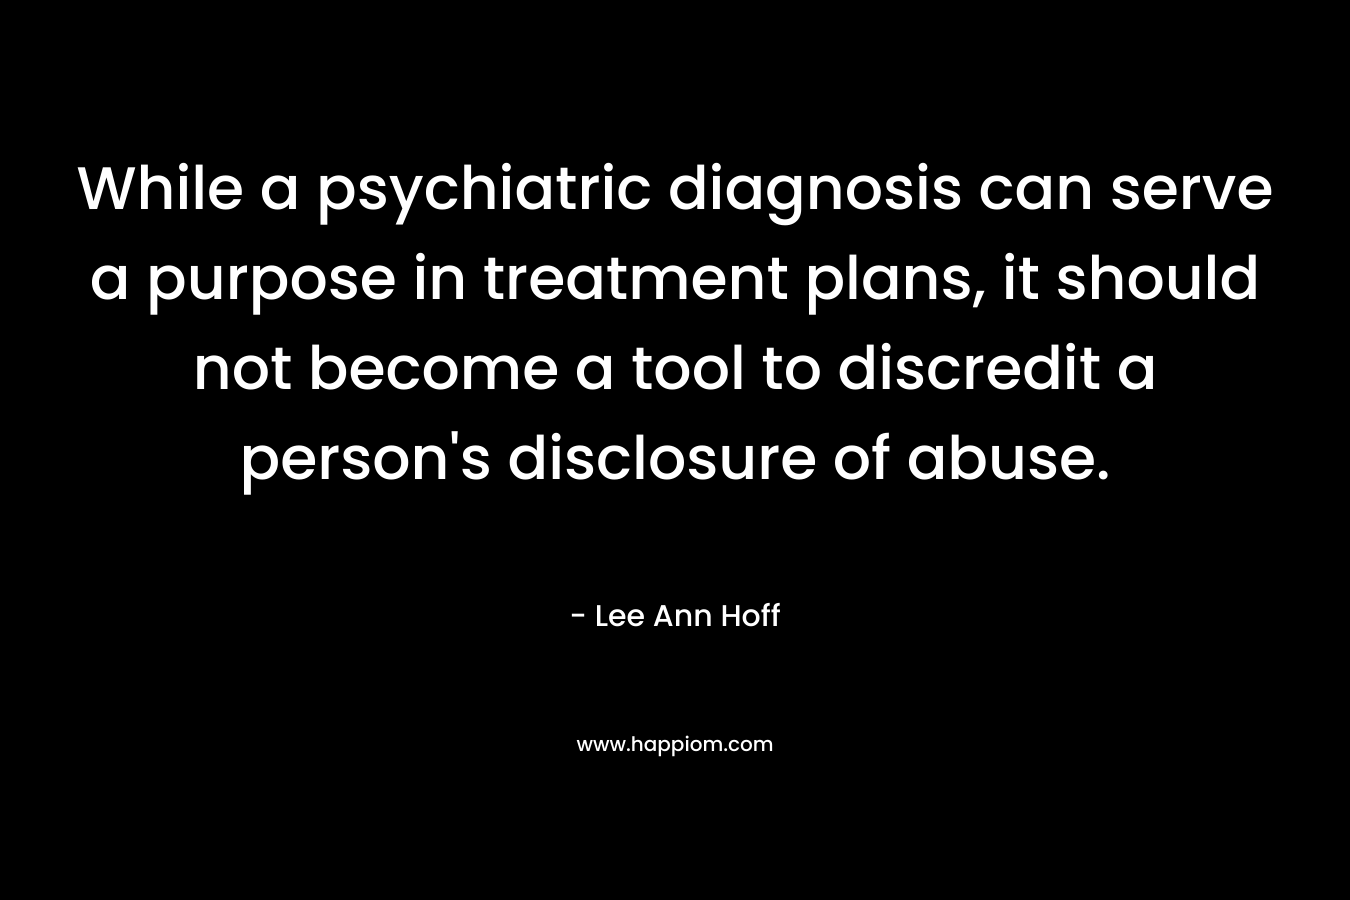 While a psychiatric diagnosis can serve a purpose in treatment plans, it should not become a tool to discredit a person's disclosure of abuse.